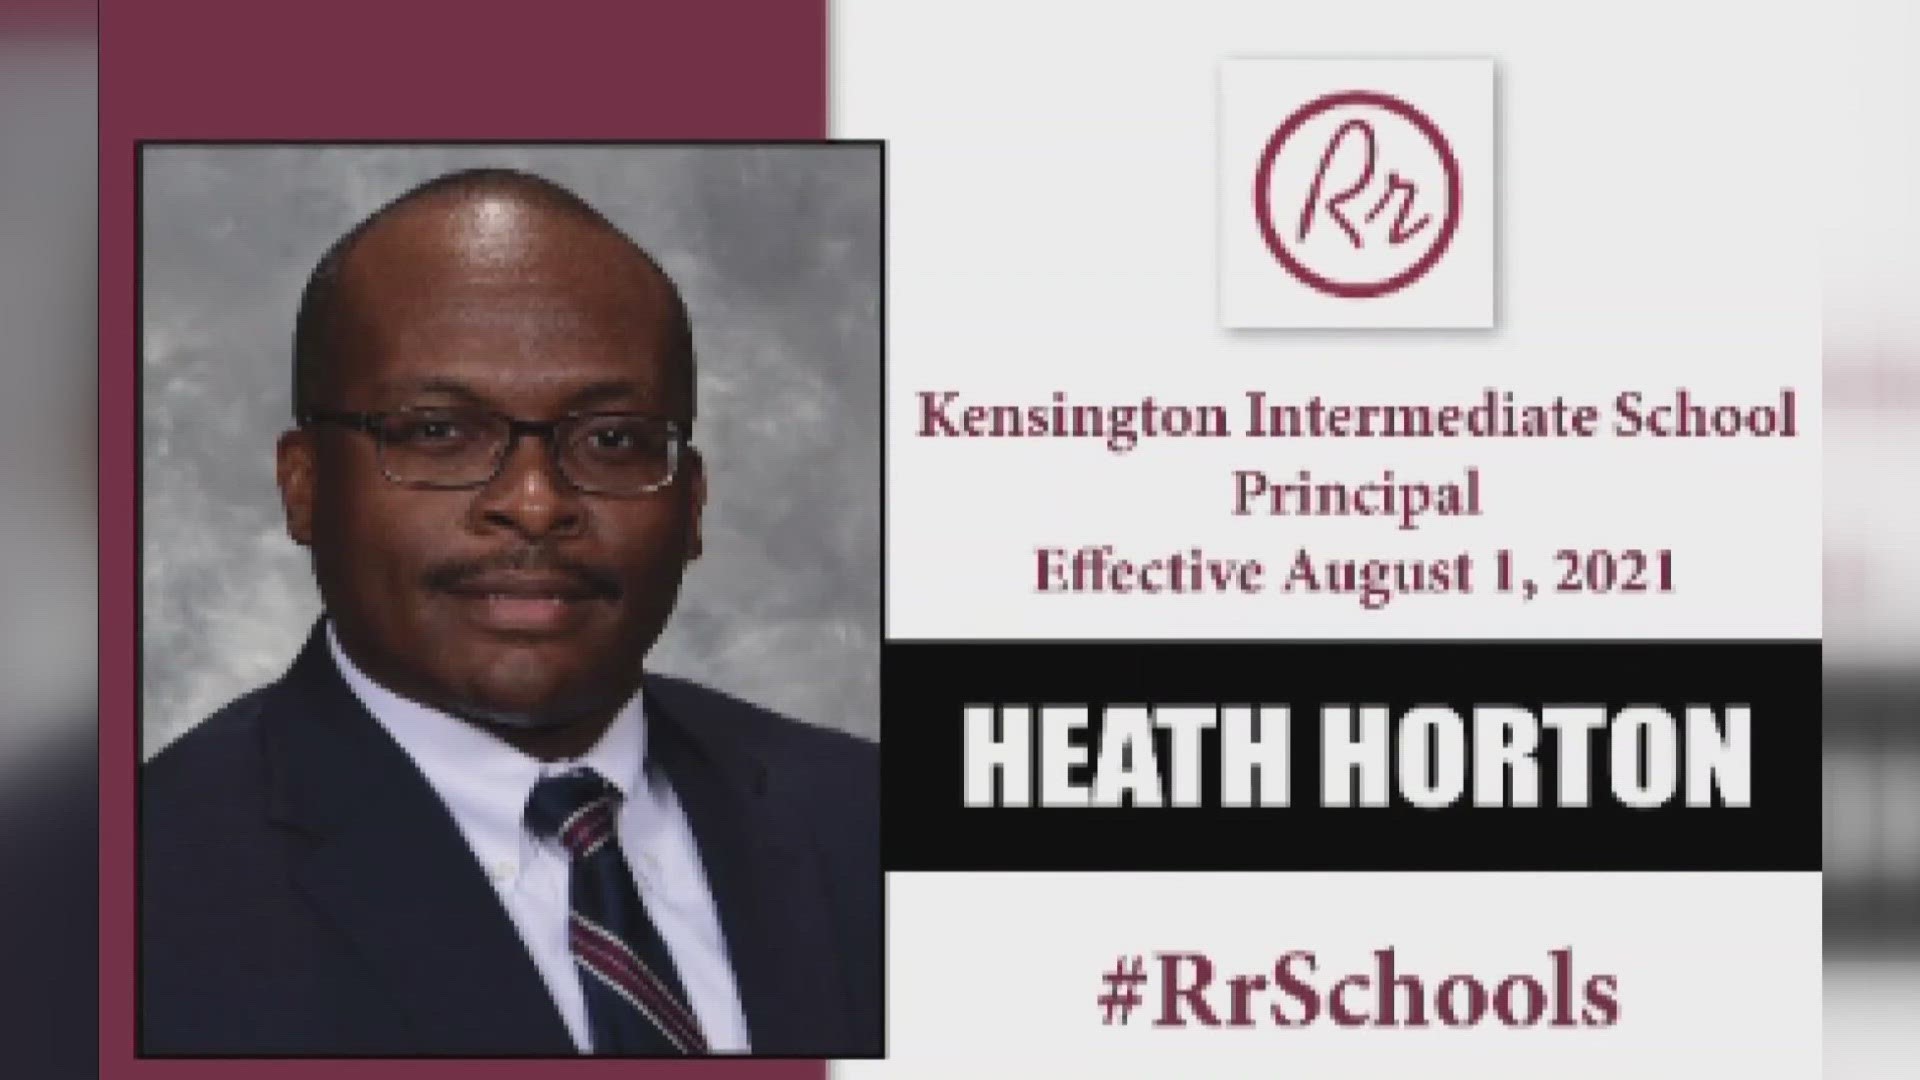 The investigation into Heath Horton started when a parent of a former Rocky River student accused him of drinking alcohol and smoking with her son.